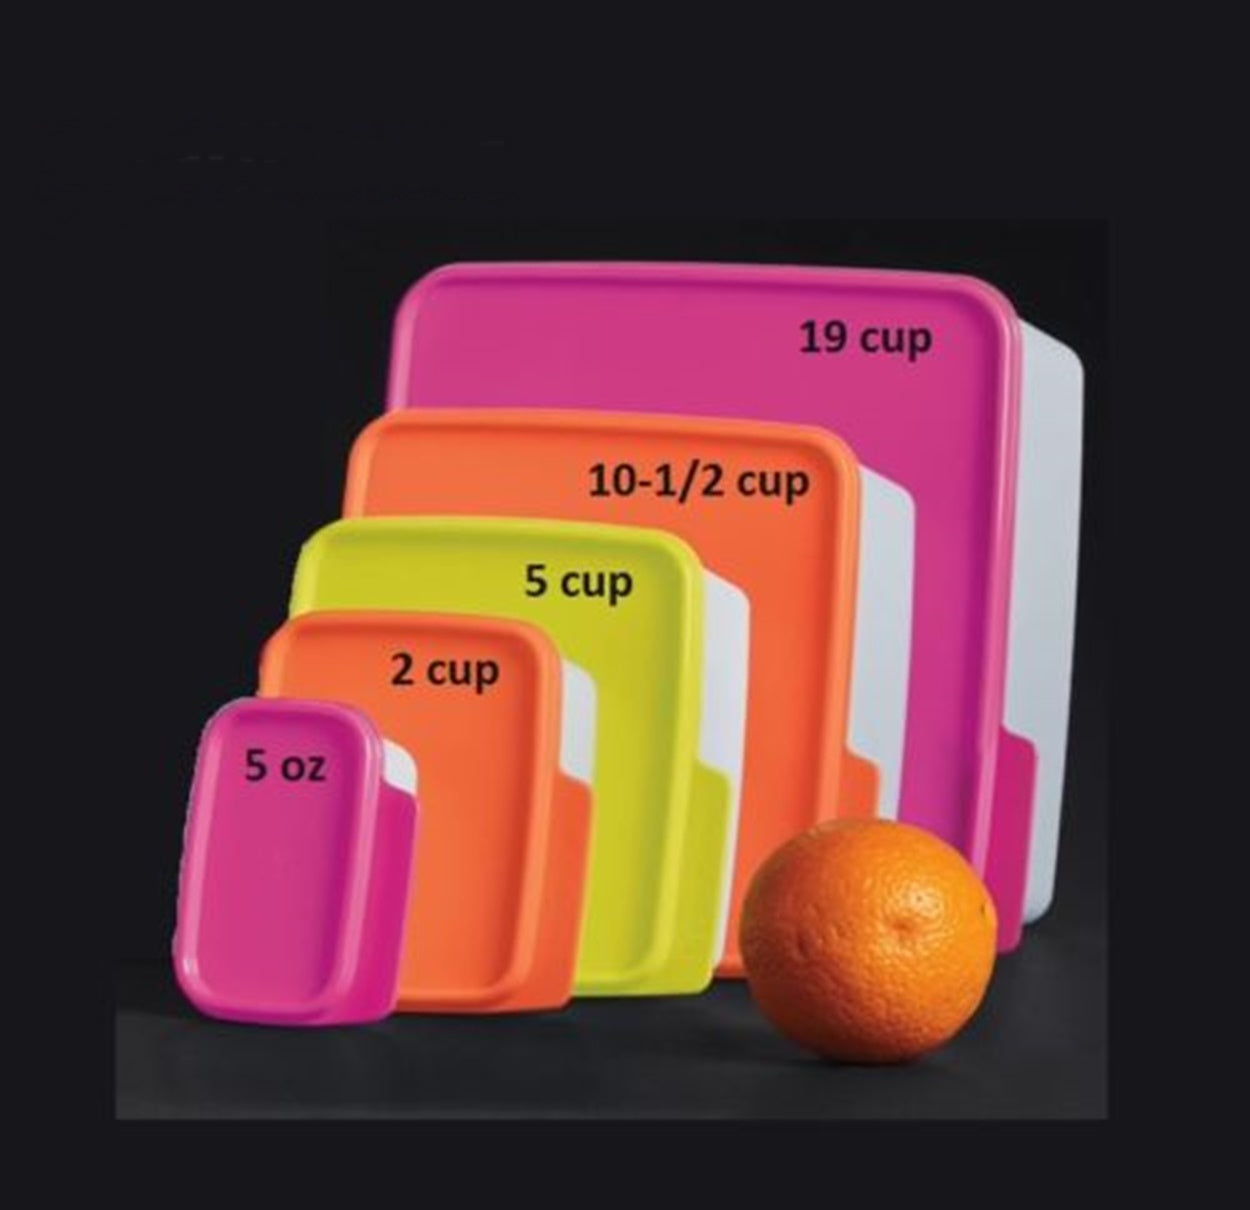 TUPPERWARE KEEP TABS 5-PC SET SQUARE STORAGE CONTAINERS w/ ELECTRIC NEON COLORED TABBED SEALS